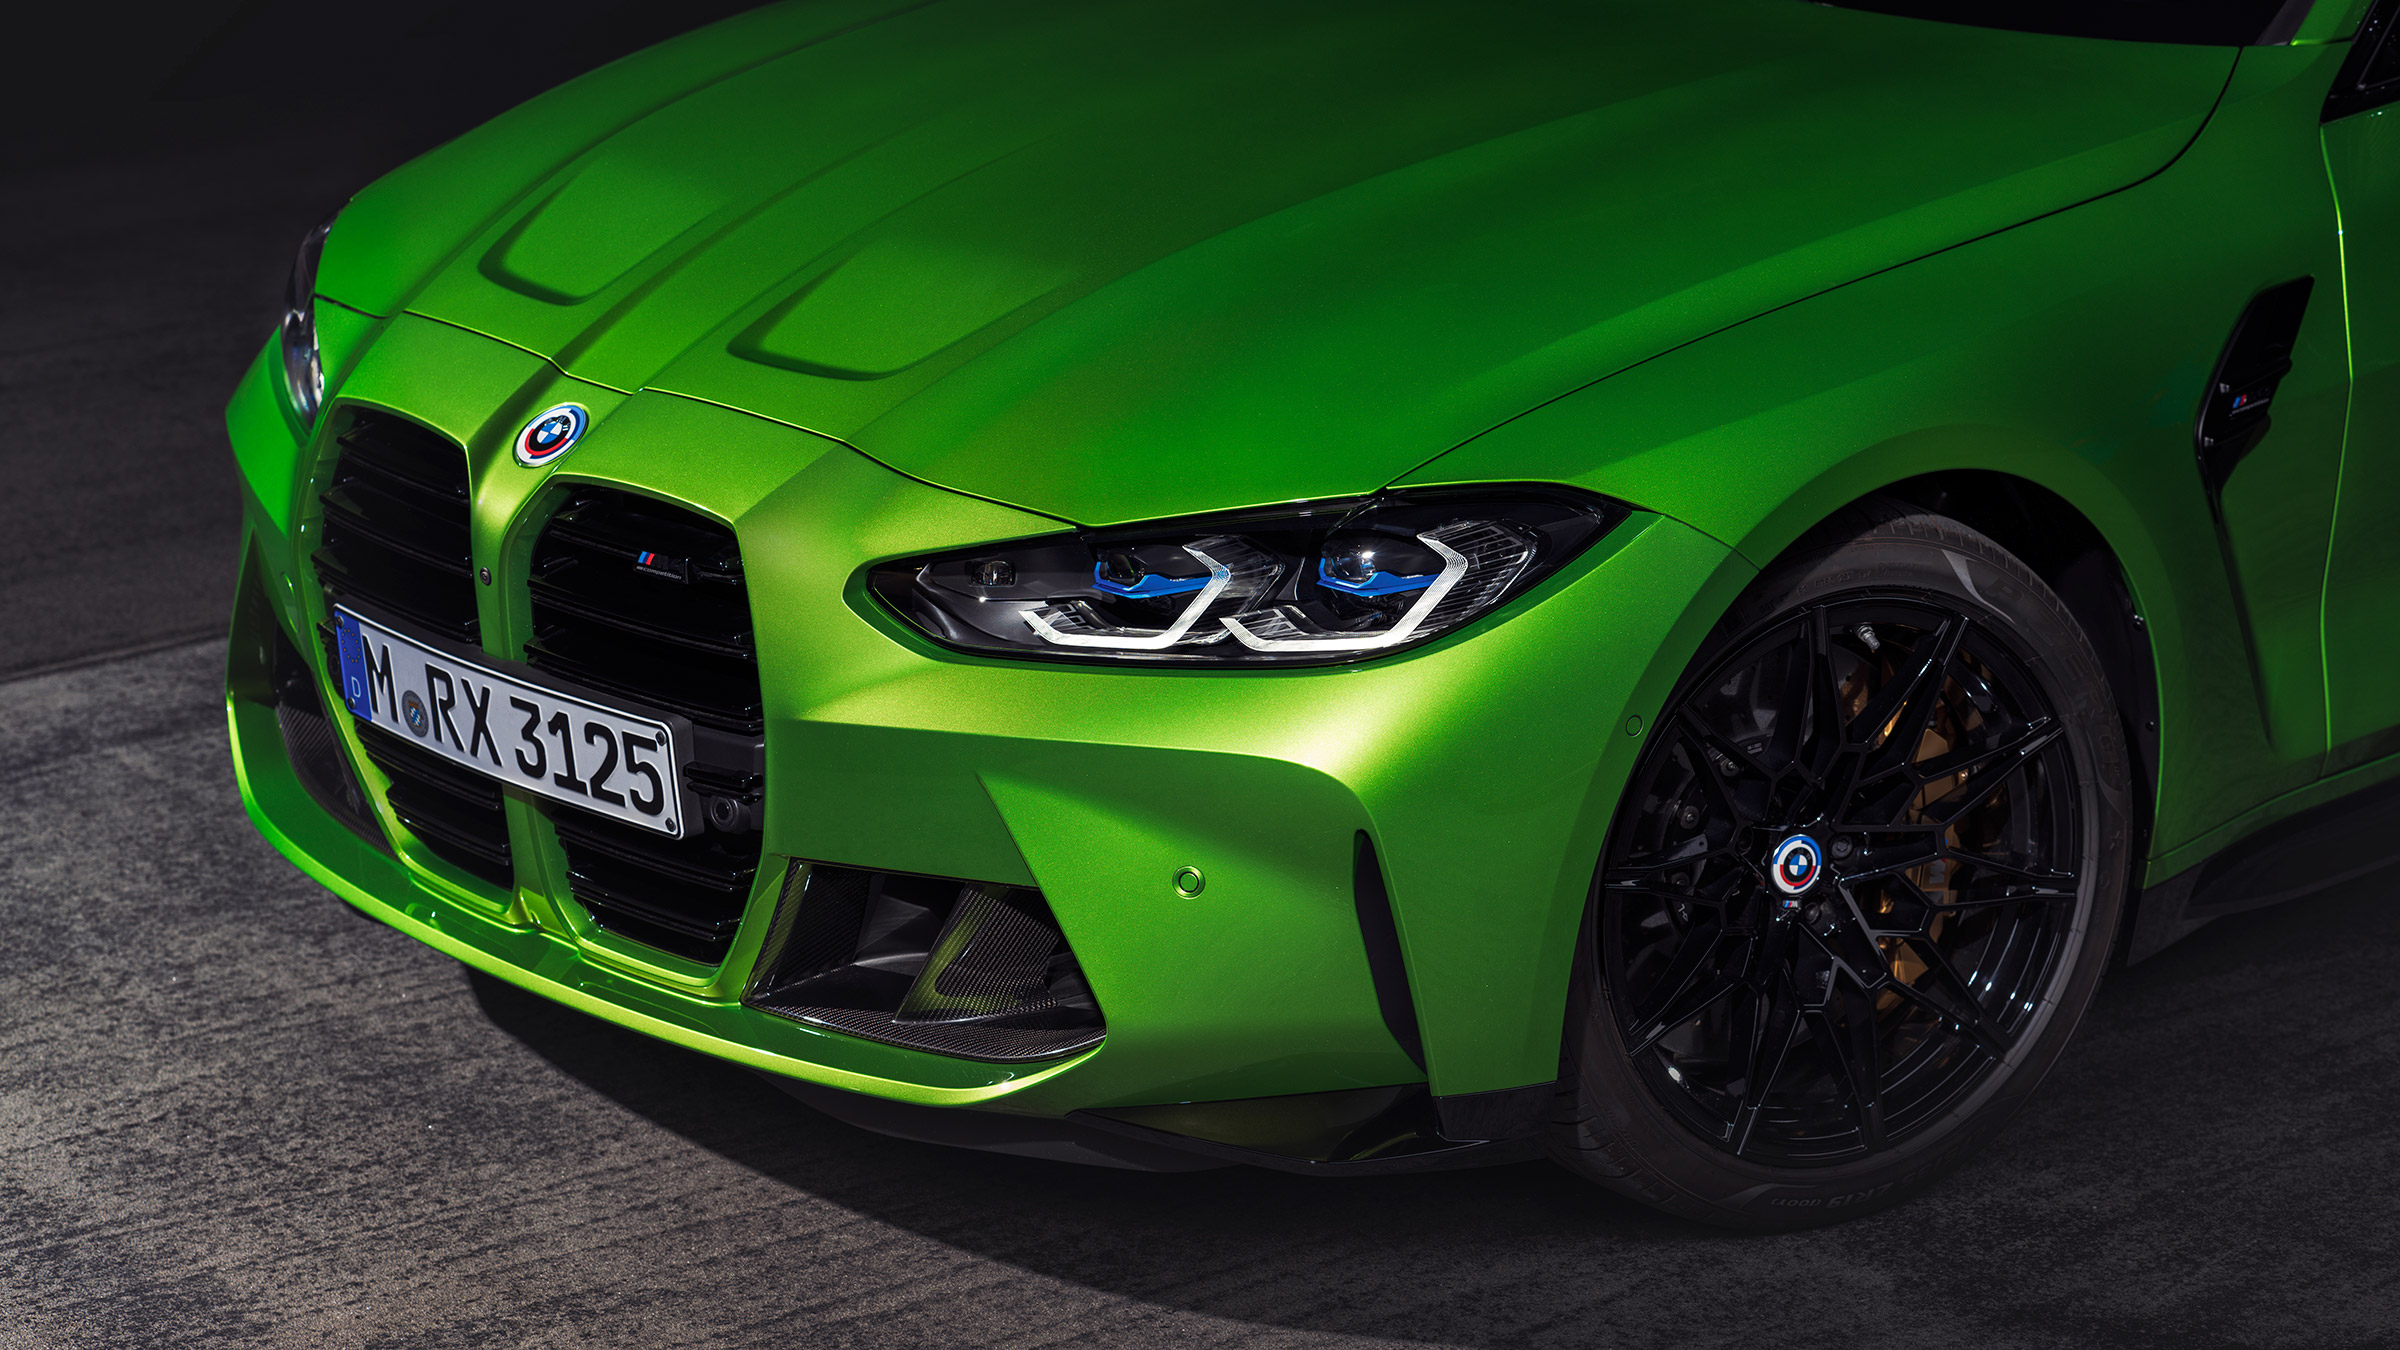 BMW M's 50th Anniversary celebrations kick off with new badge and